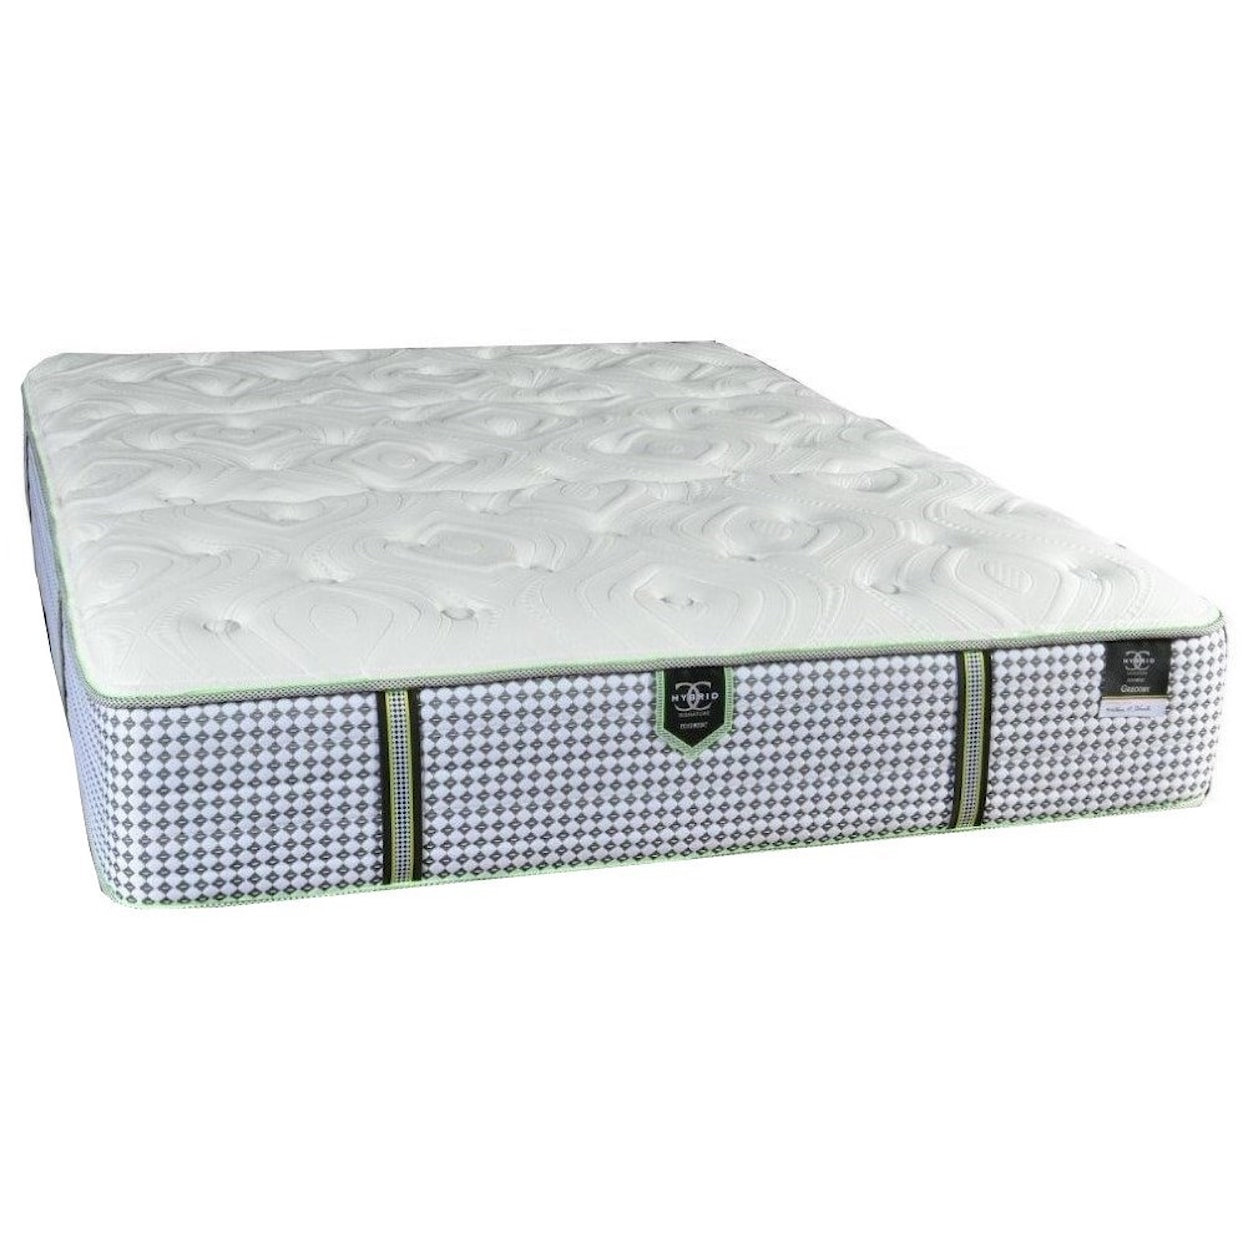 Restonic Gregory Firm Queen Pocketed Coil Mattress